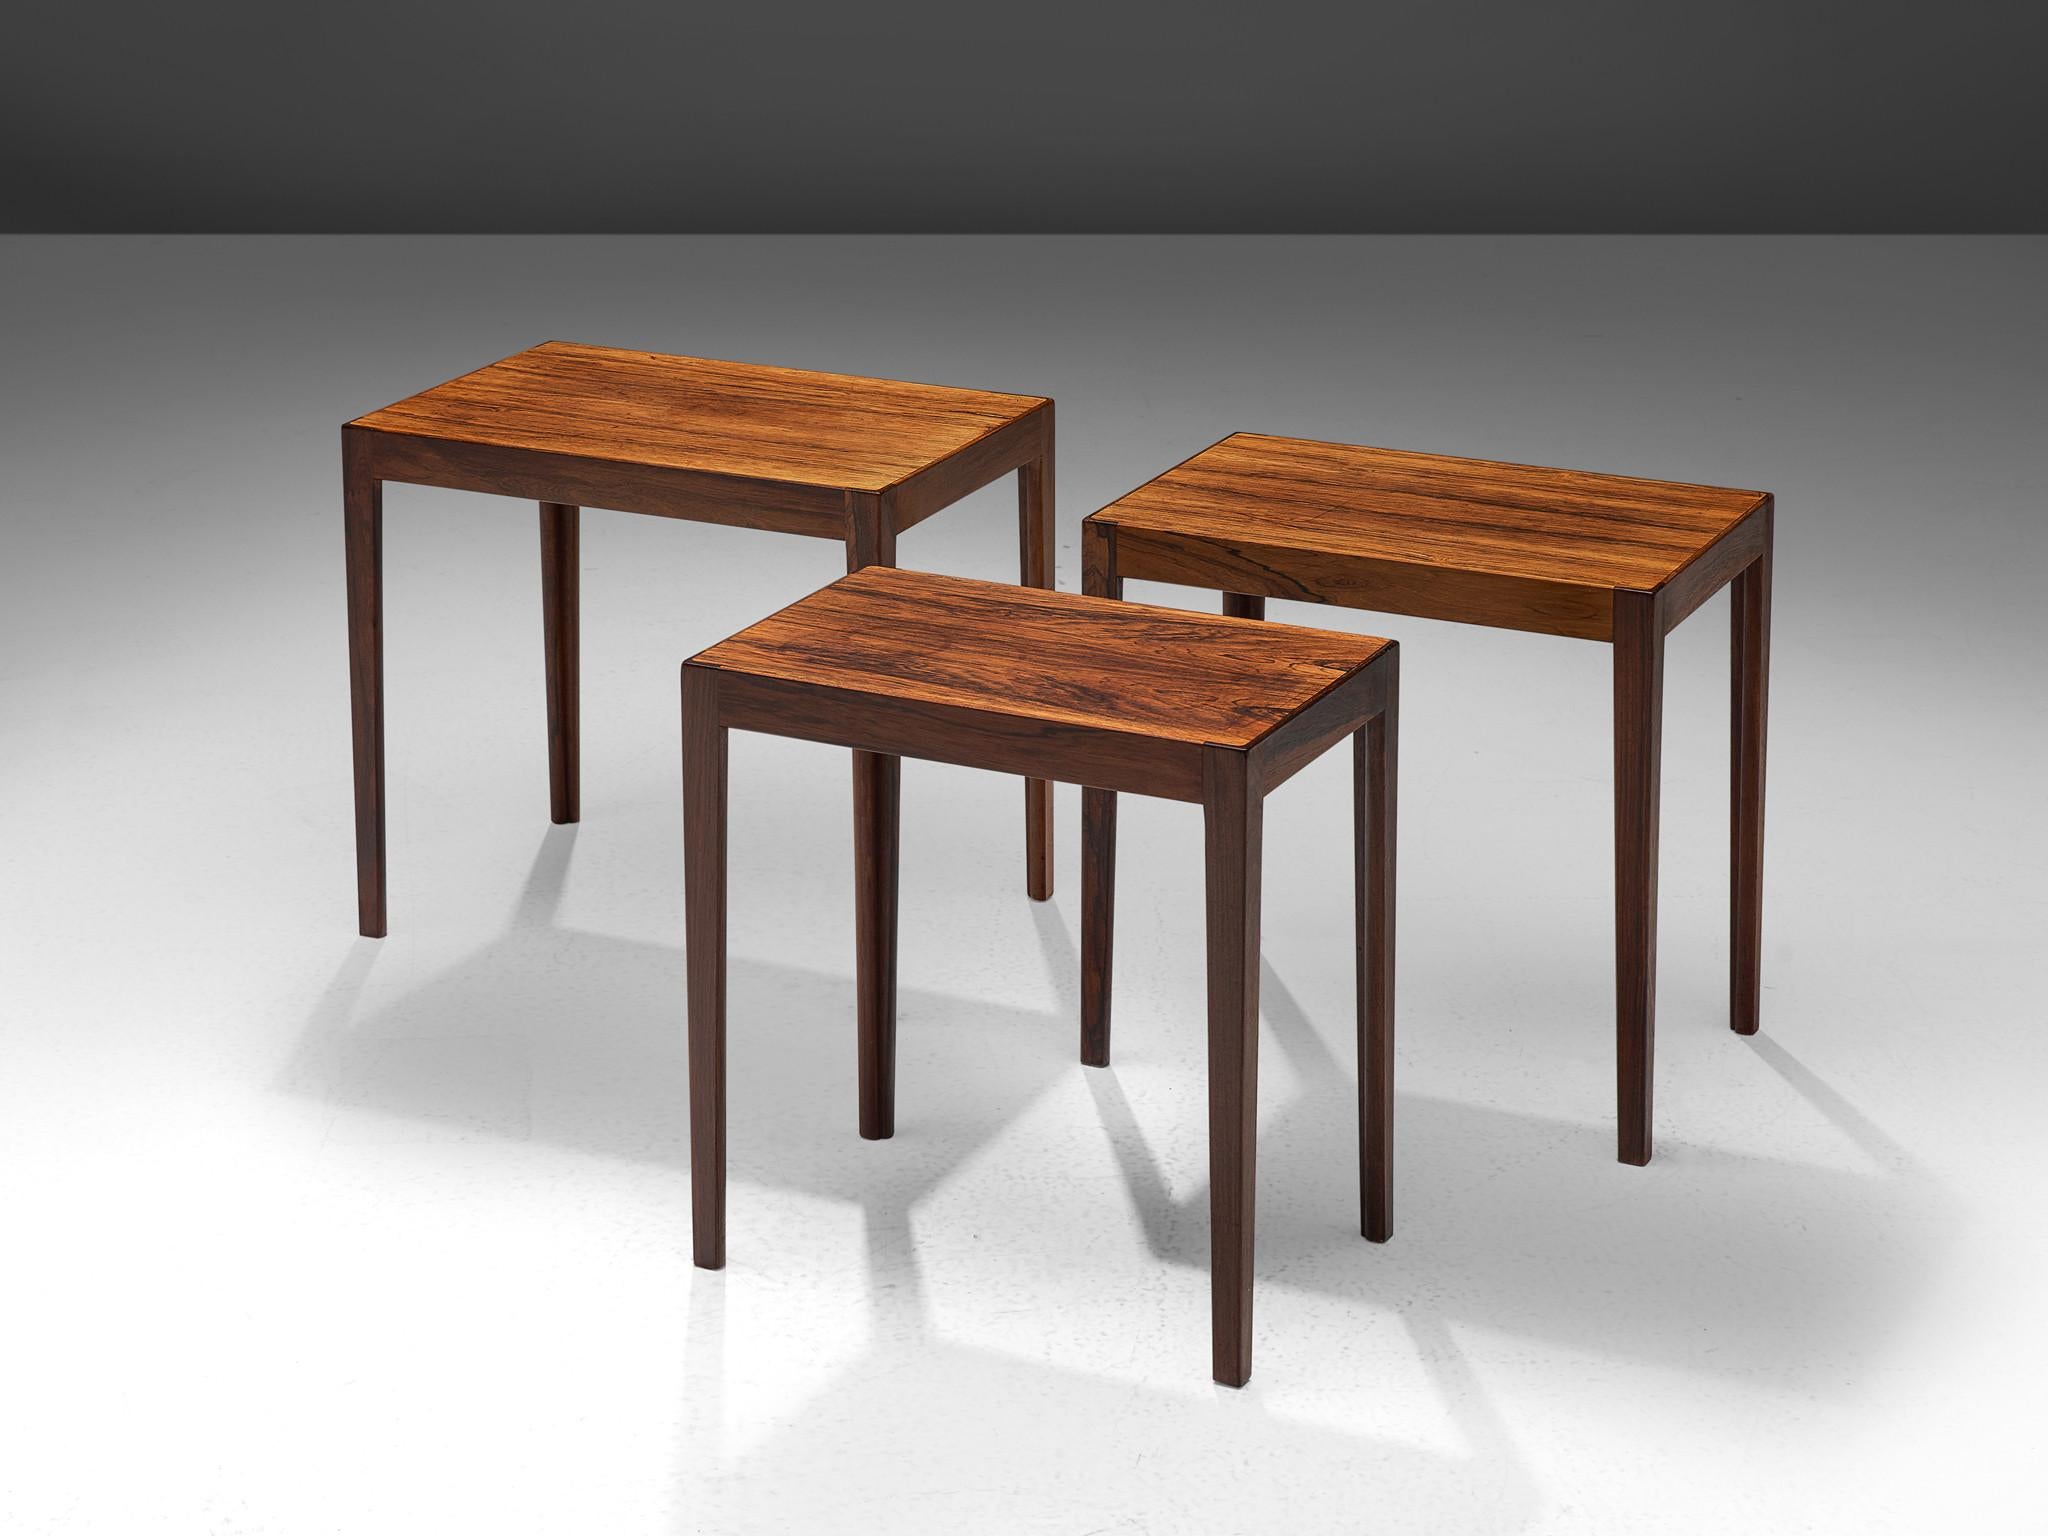 Nesting tables, in rosewood, The Netherlands, 1960s.

Nest of three tables is rosewood. With a tight base of slats, beautifully connected with wood joints. The rectangular top has a nice trim which emphasize the grain of the rosewood, the legs are